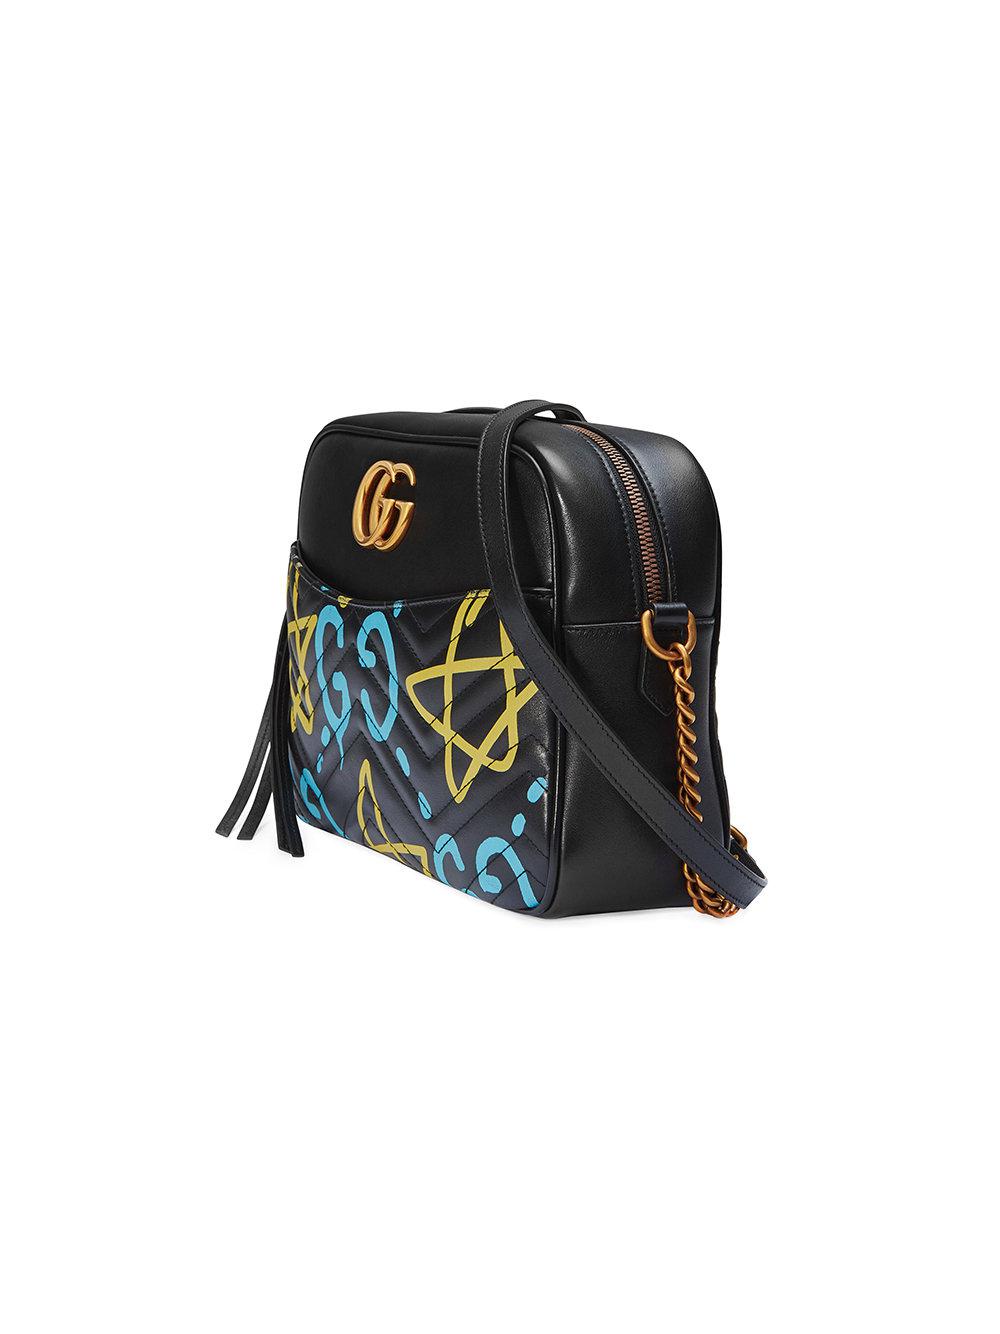 Gucci Ghost GG Marmont Graffiti-Print Leather Shoulder Bag in Black - Lyst